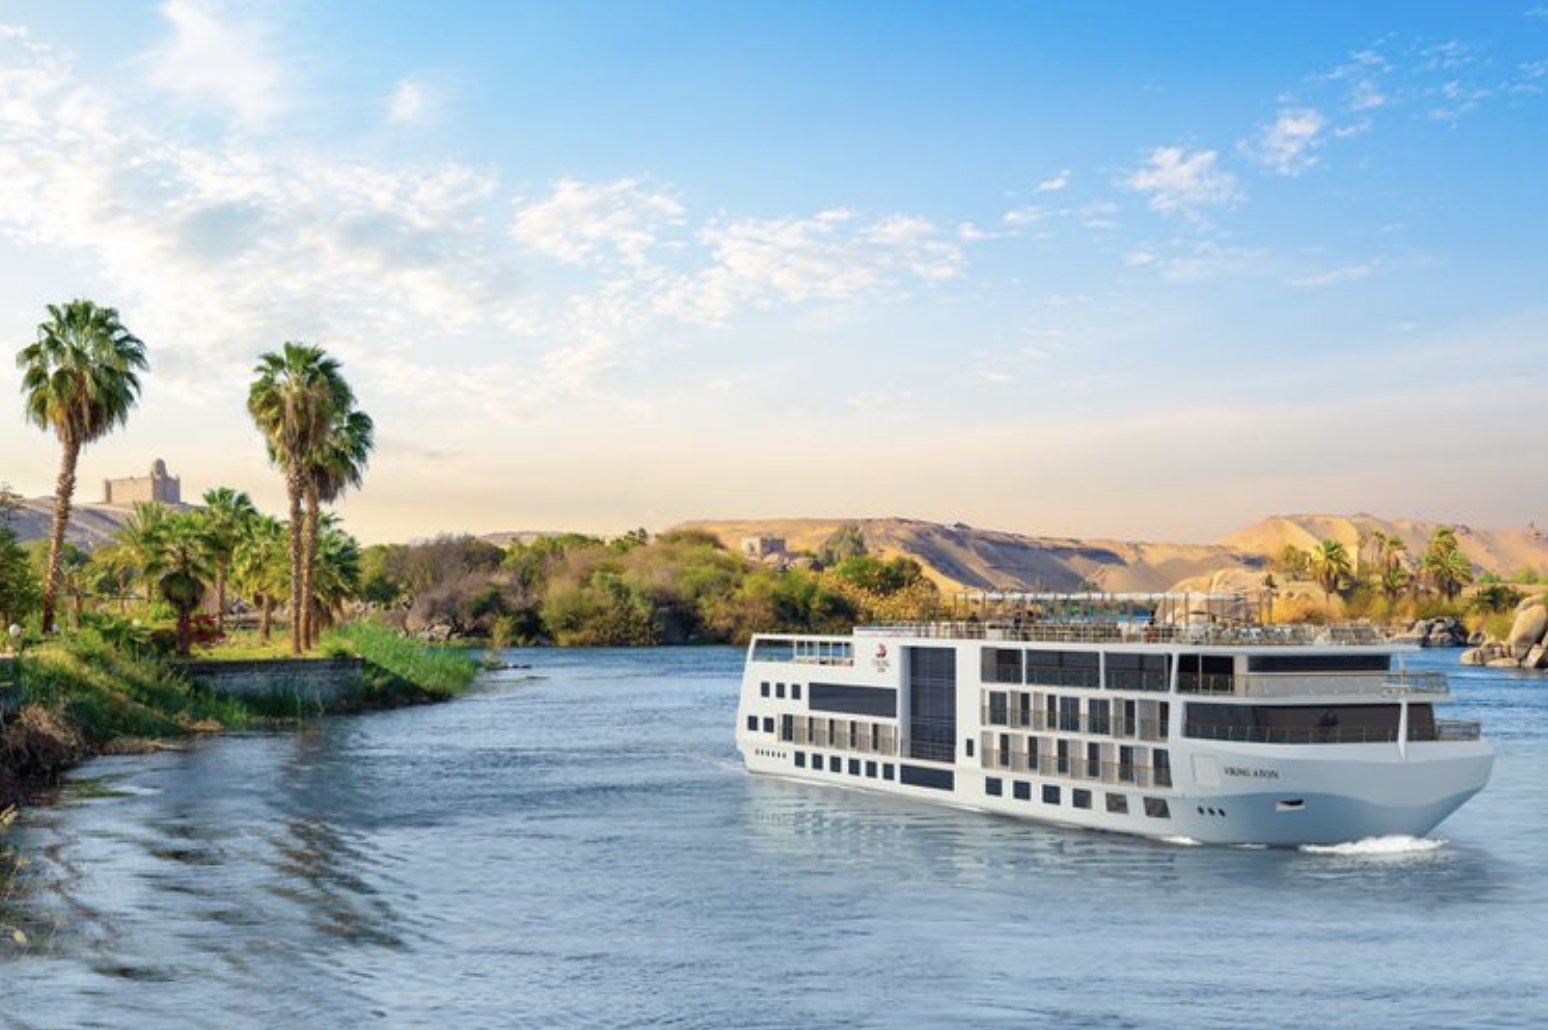 Best time to cruise the Nile